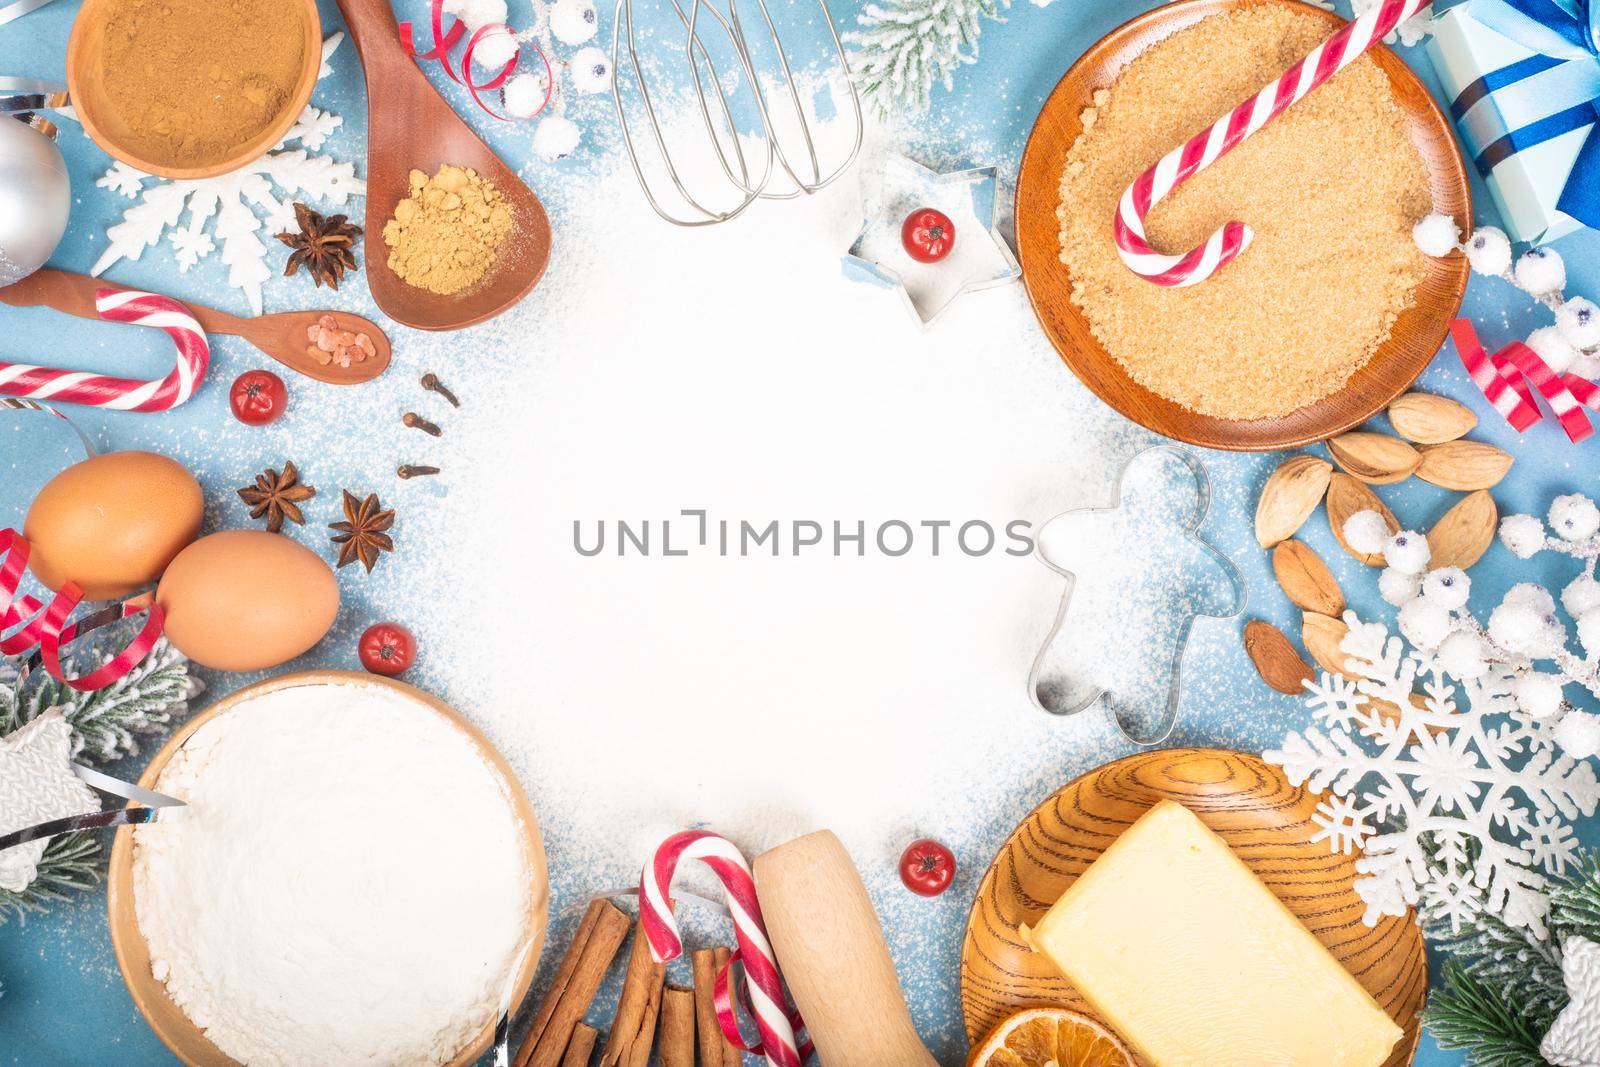 Christmas gingerbread cookies cooking background flat lay top view template with copy space for text. Baking utensils, spices and food ingredients on blue background